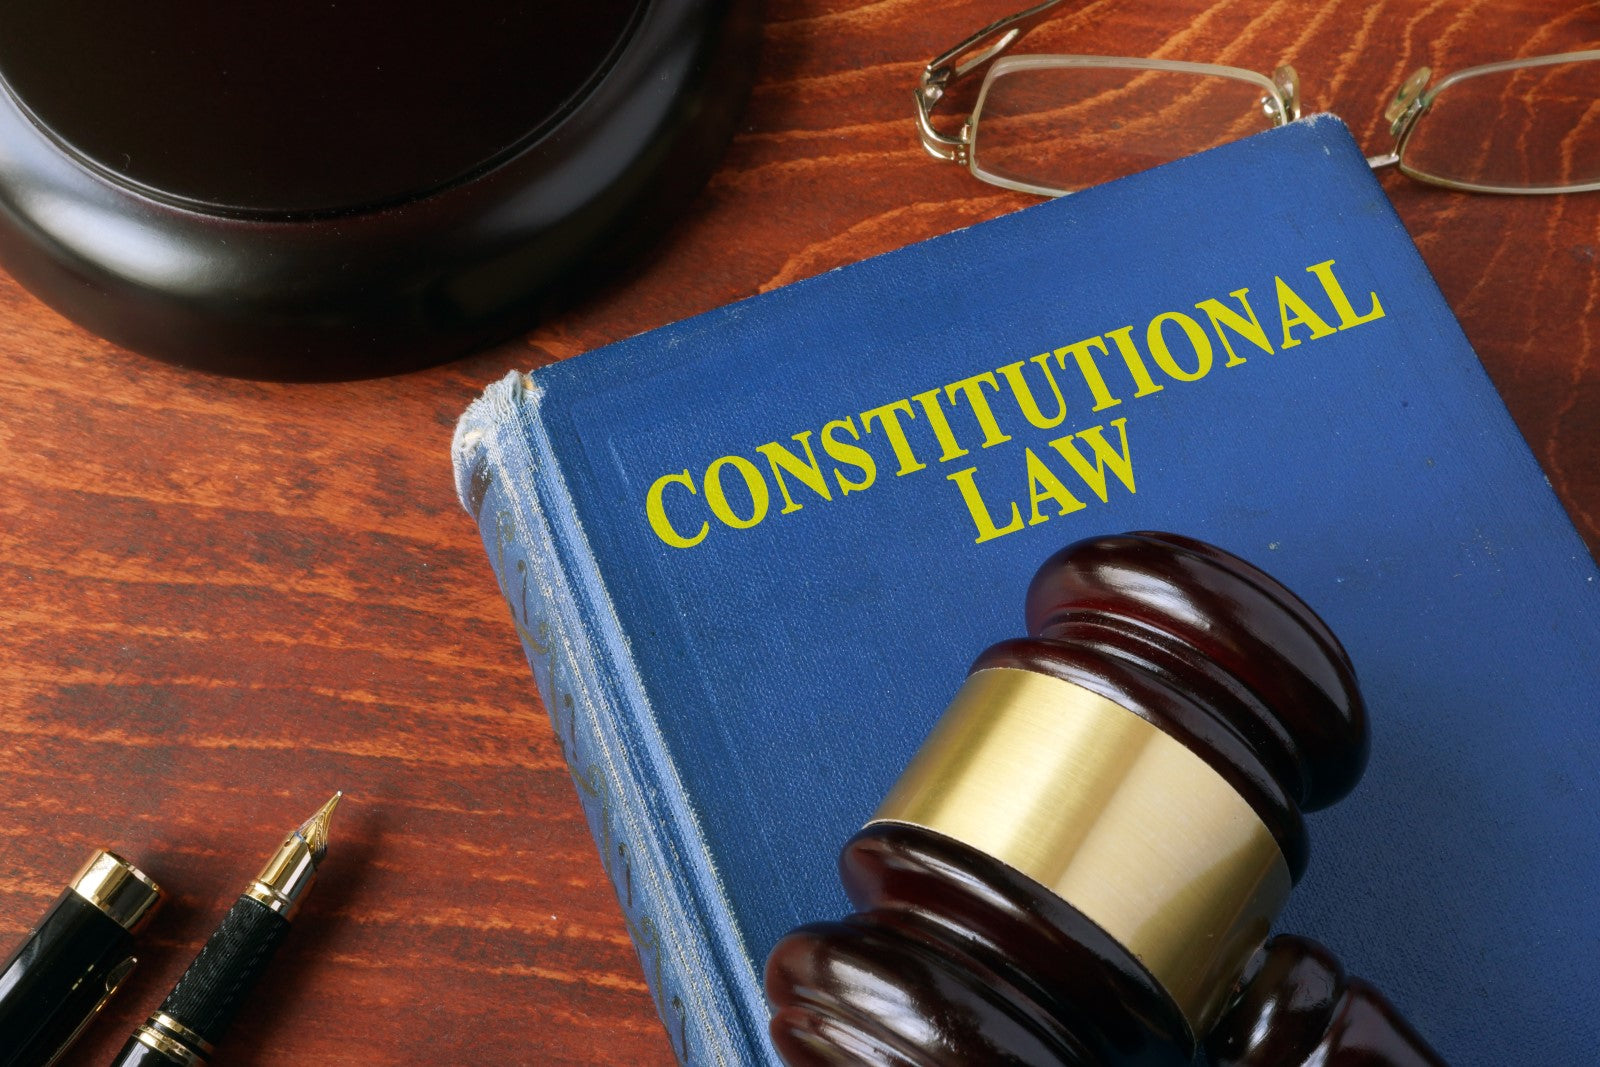 Constitutional Lawmaking: The Founders' Vision of Limited Government